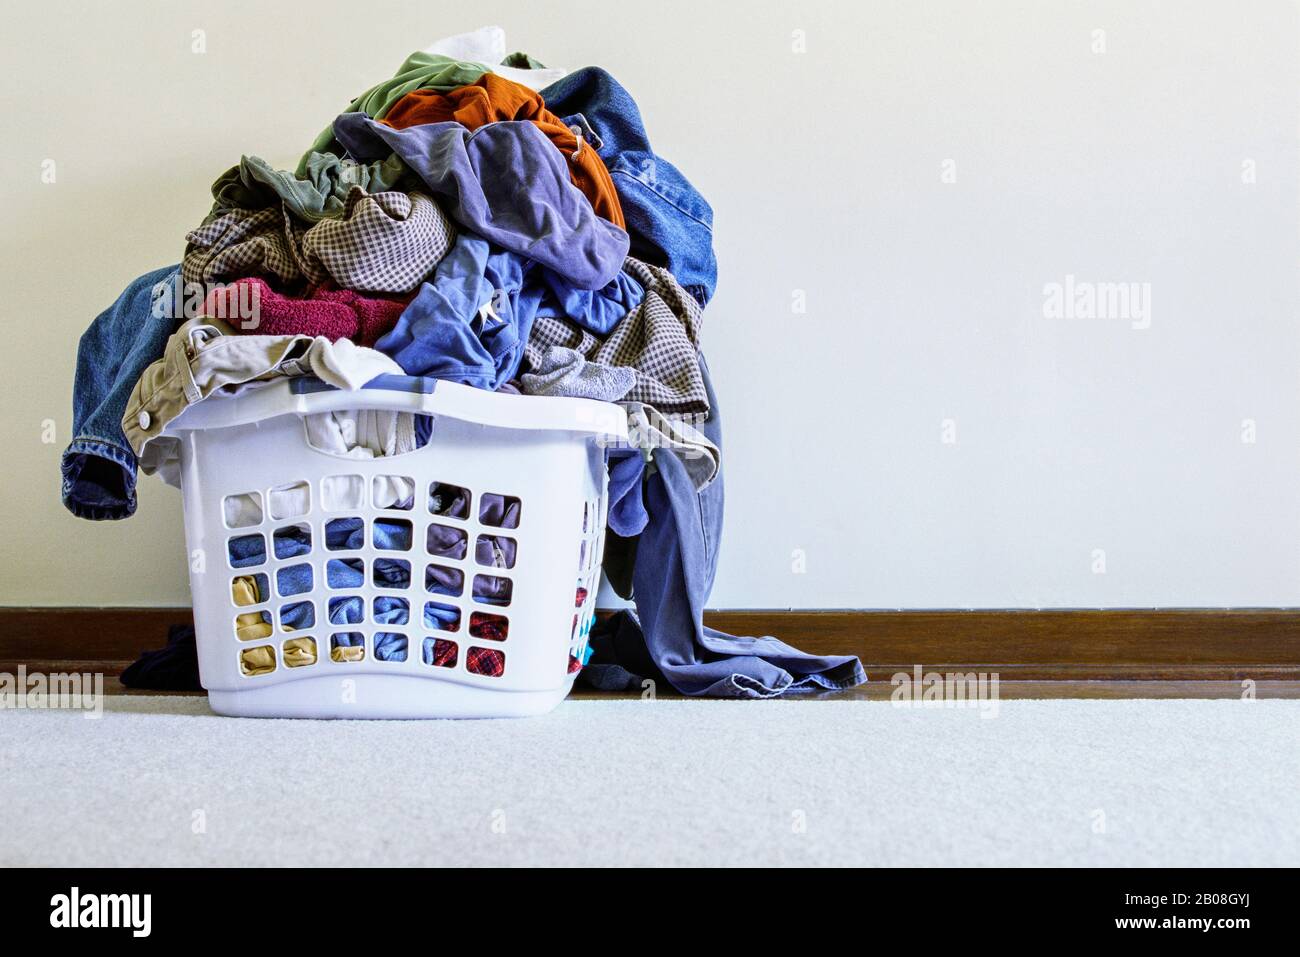 A laundry bin overflowing with dirty clothes. Stock Photo